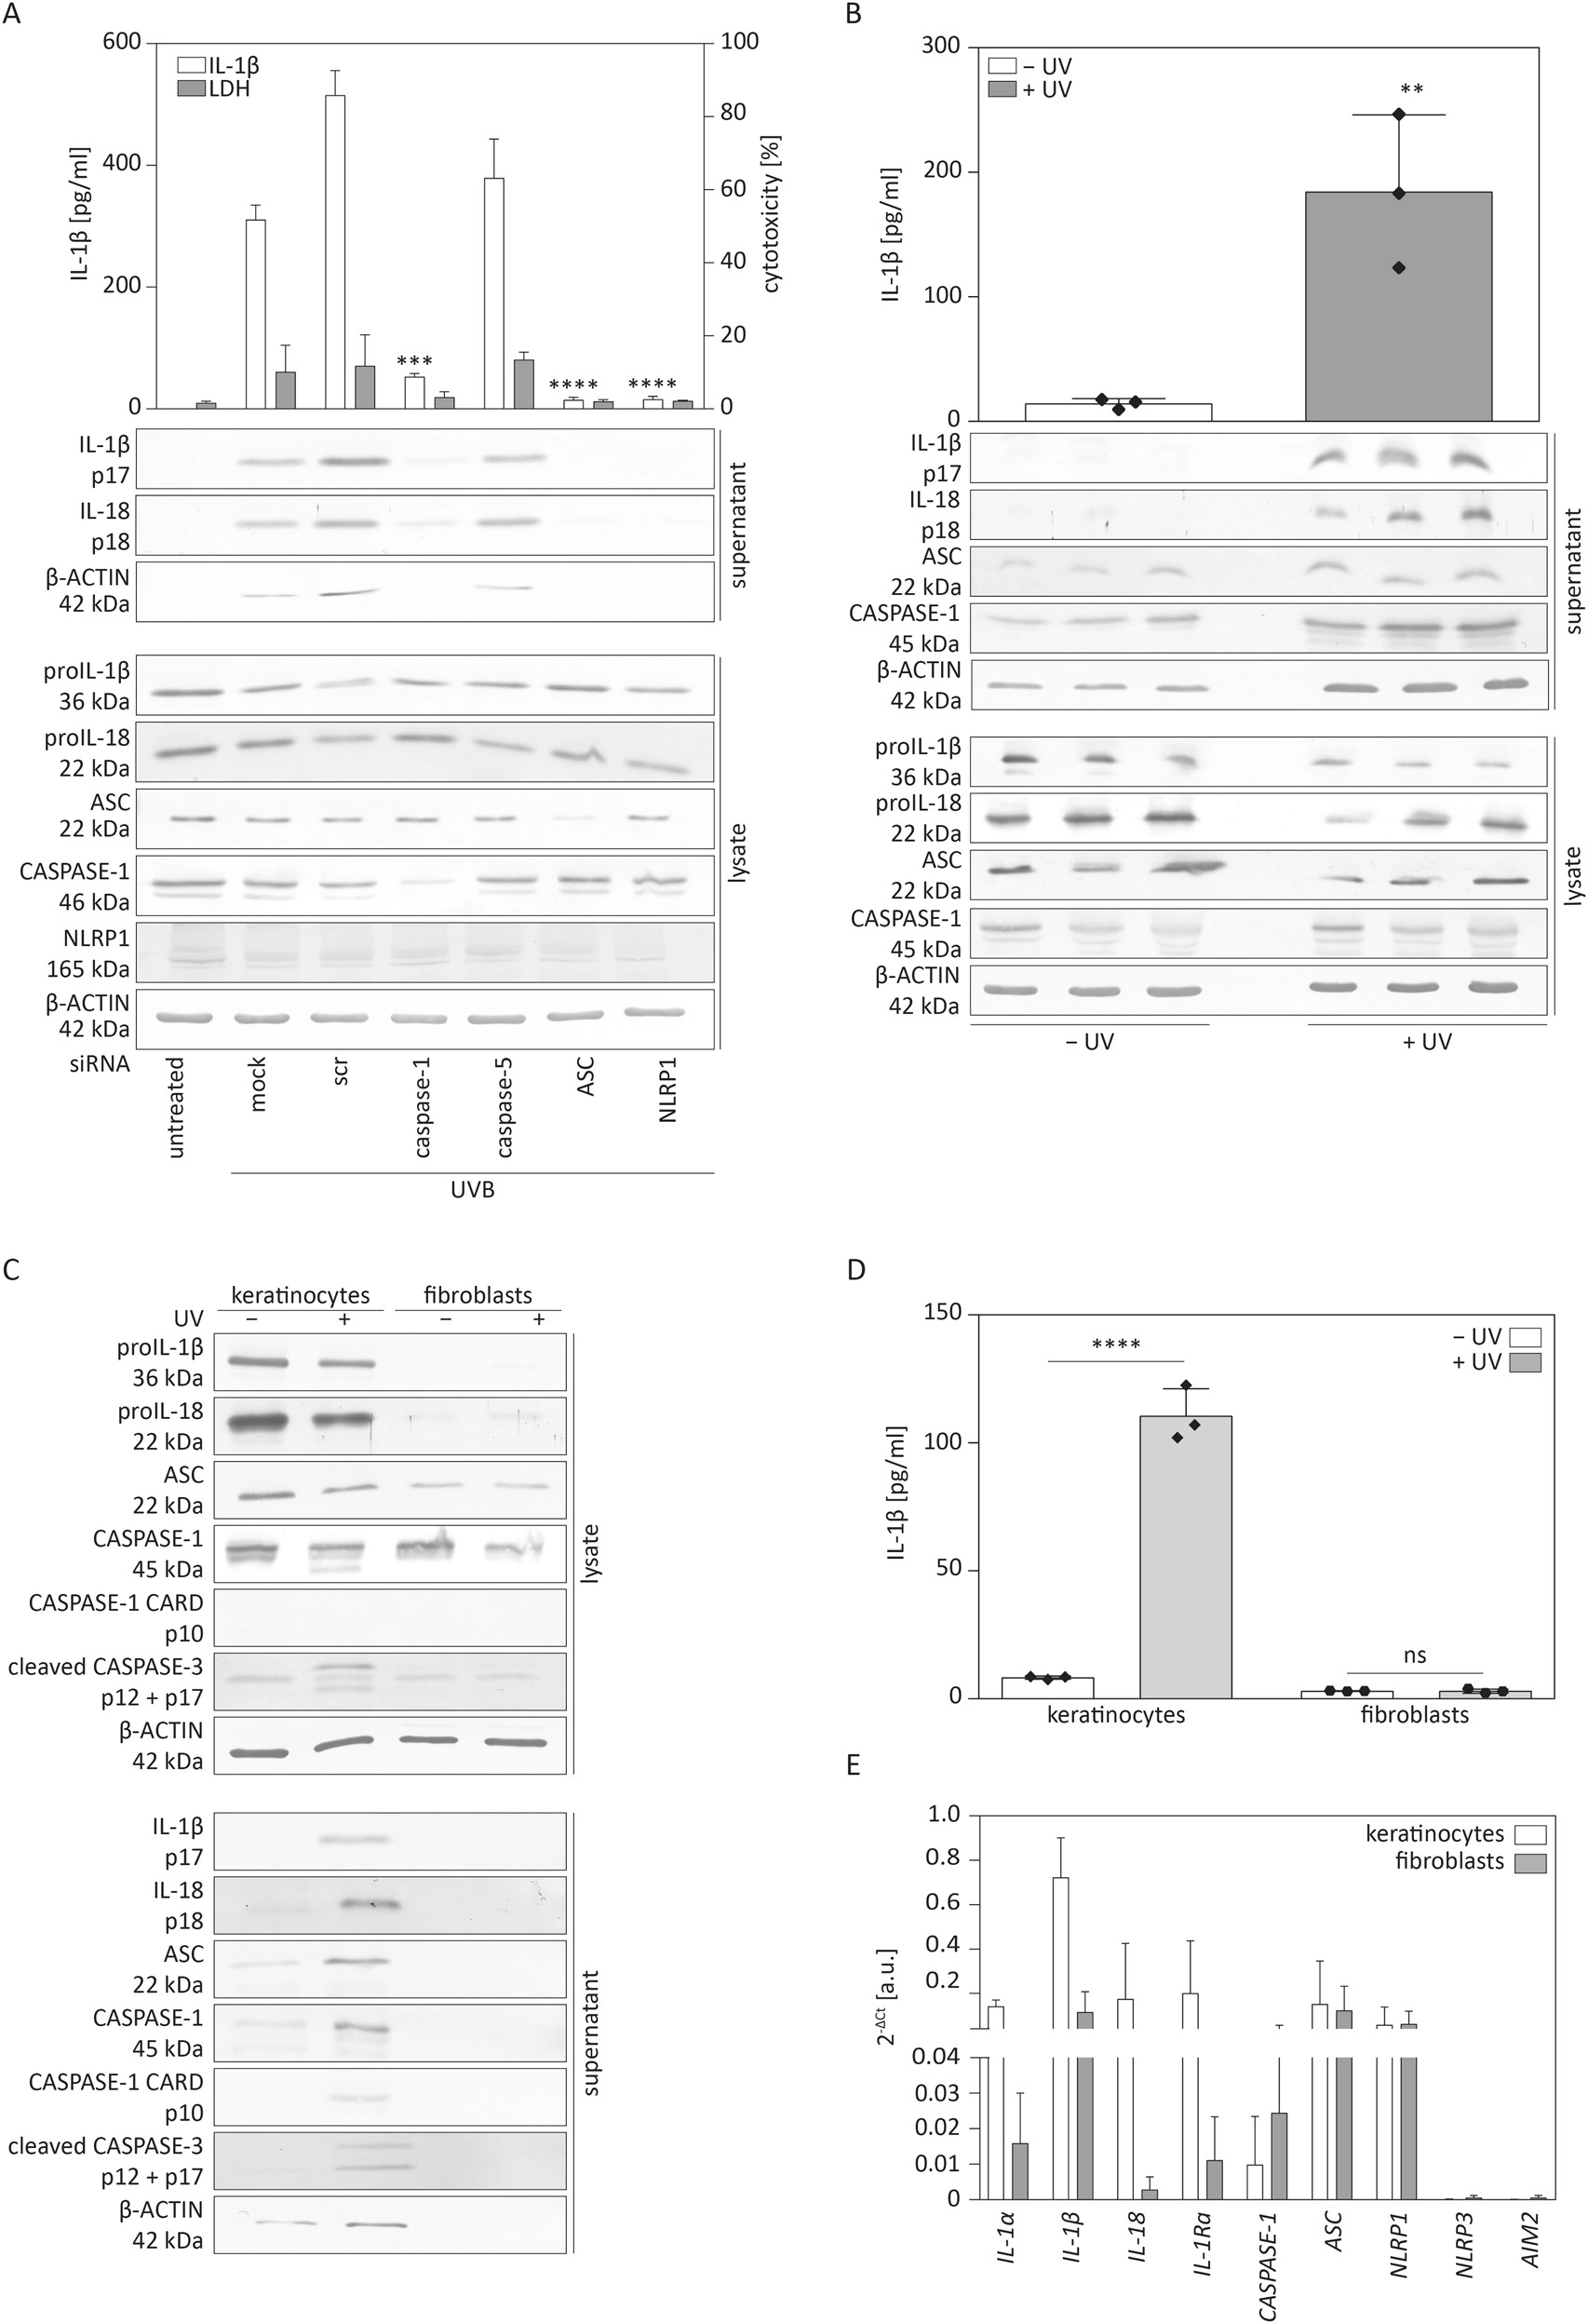 Expression of inflammasome proteins and inflammasome activation occurs in human, but not in murine keratinocytes